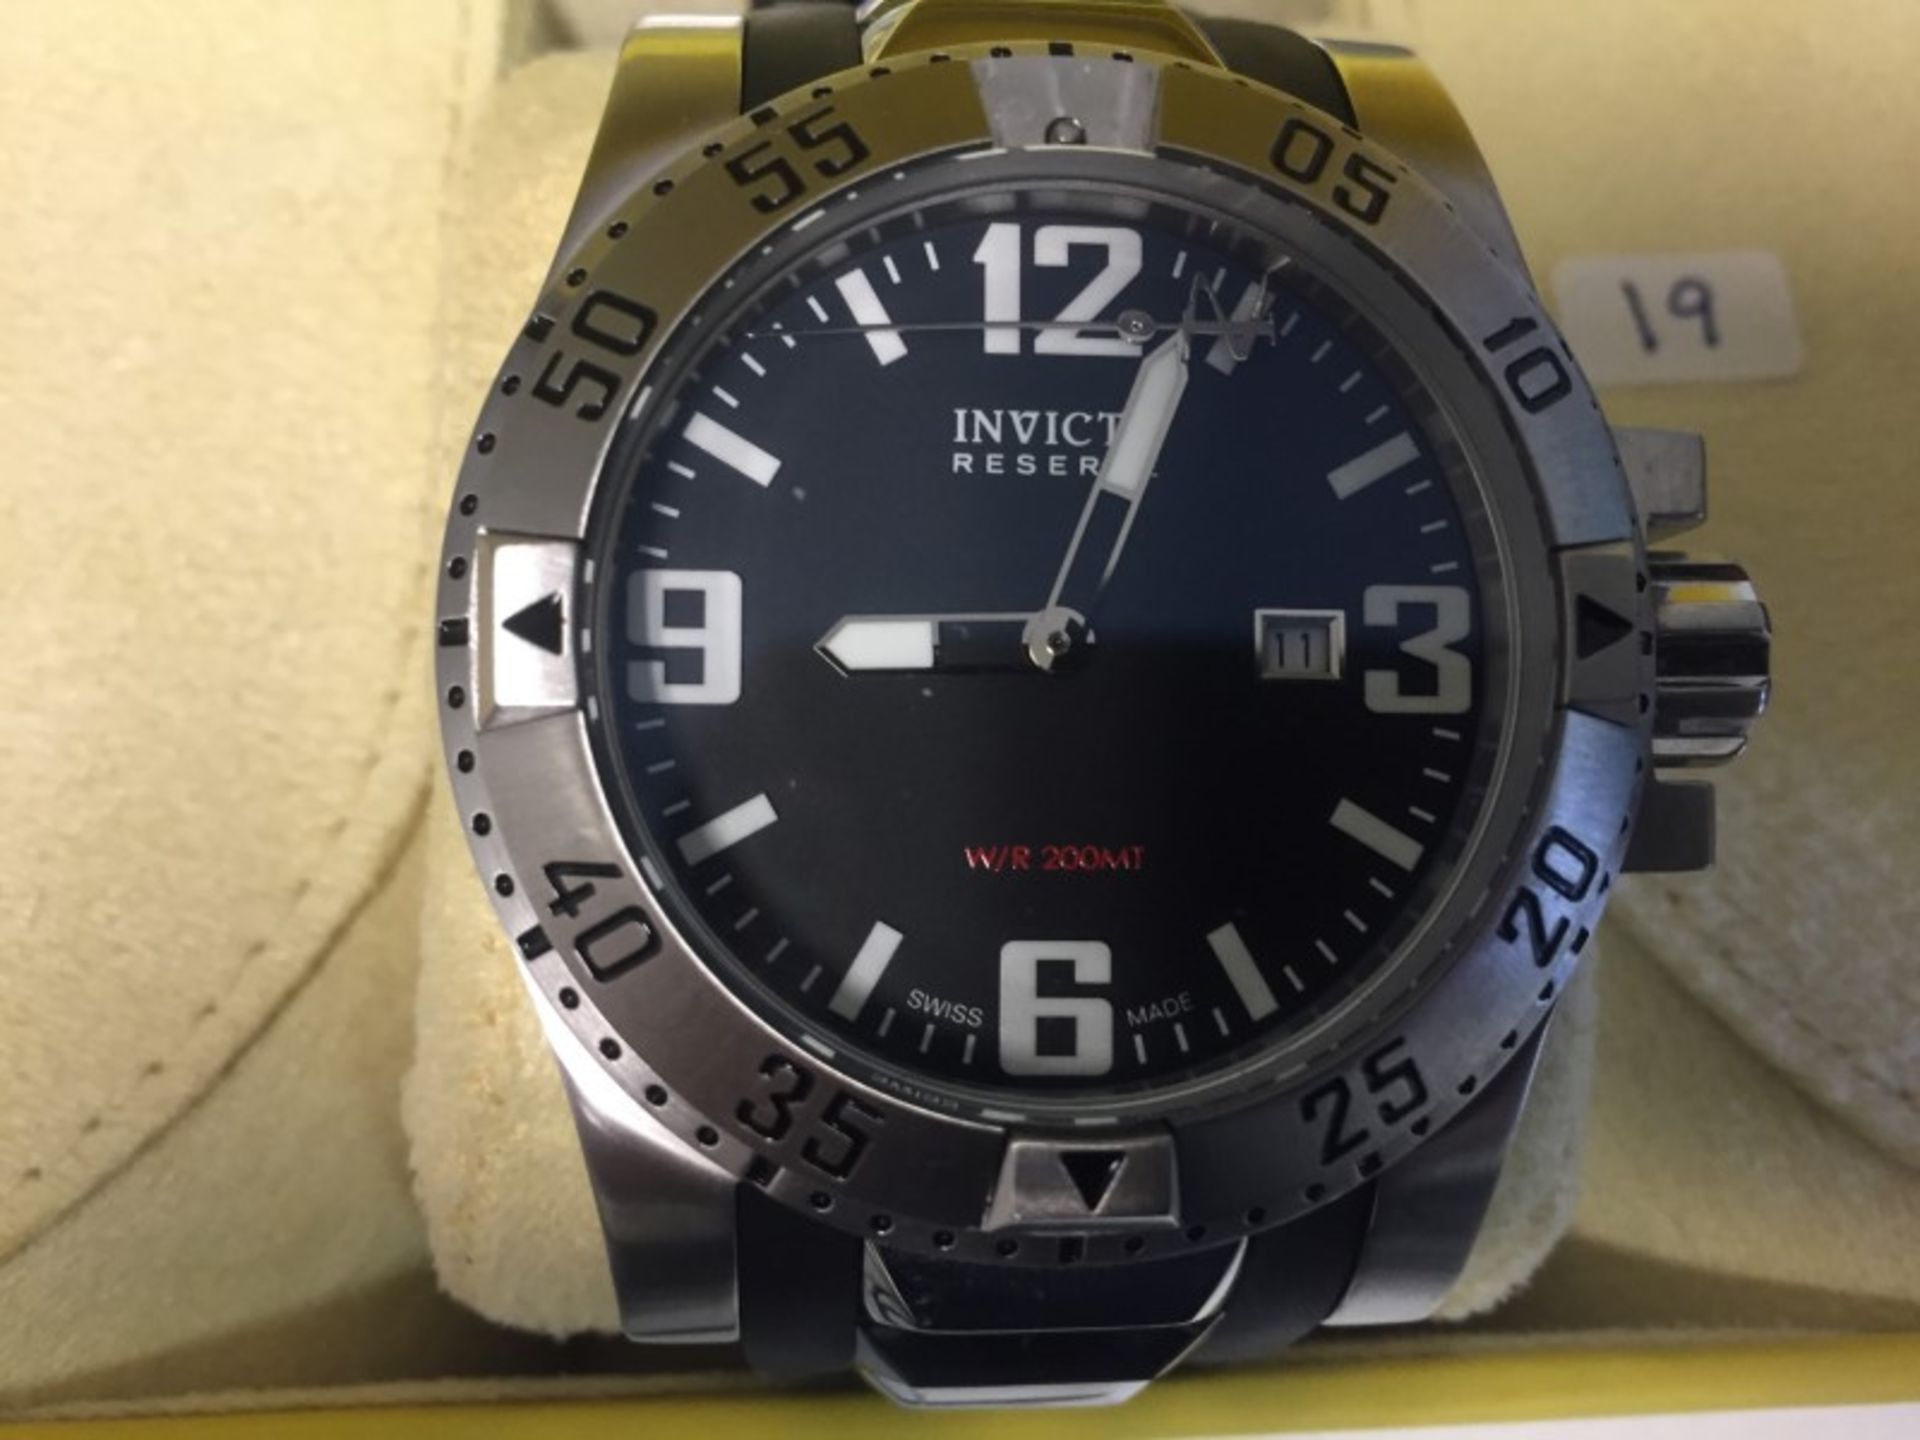 Invicta watch-Stainless Steel Case/Water Resistant - Image 2 of 2